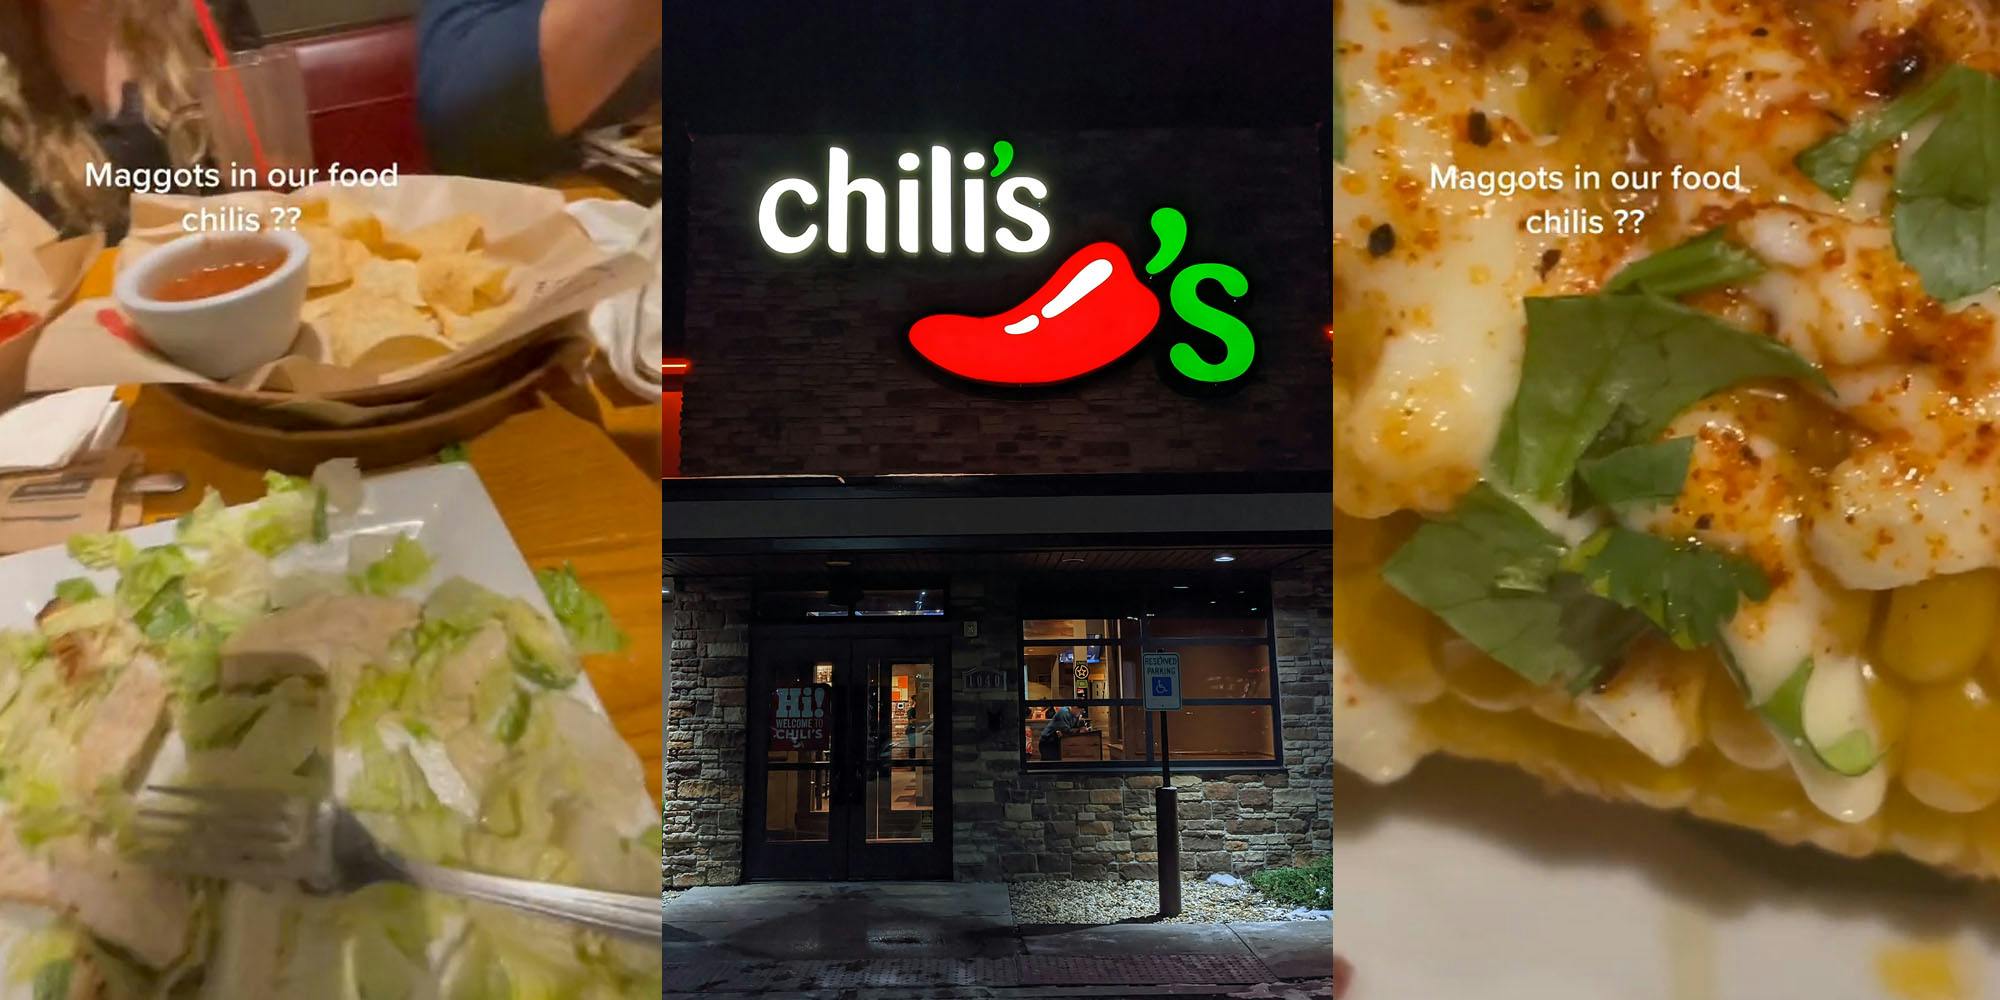 Chilis table with family bowl of chips and salad caption "maggots in our food chili's?" (l) Chili's Bar and Grill building with sign (c) Close up of food caption "maggots in our food chili's?" (r)